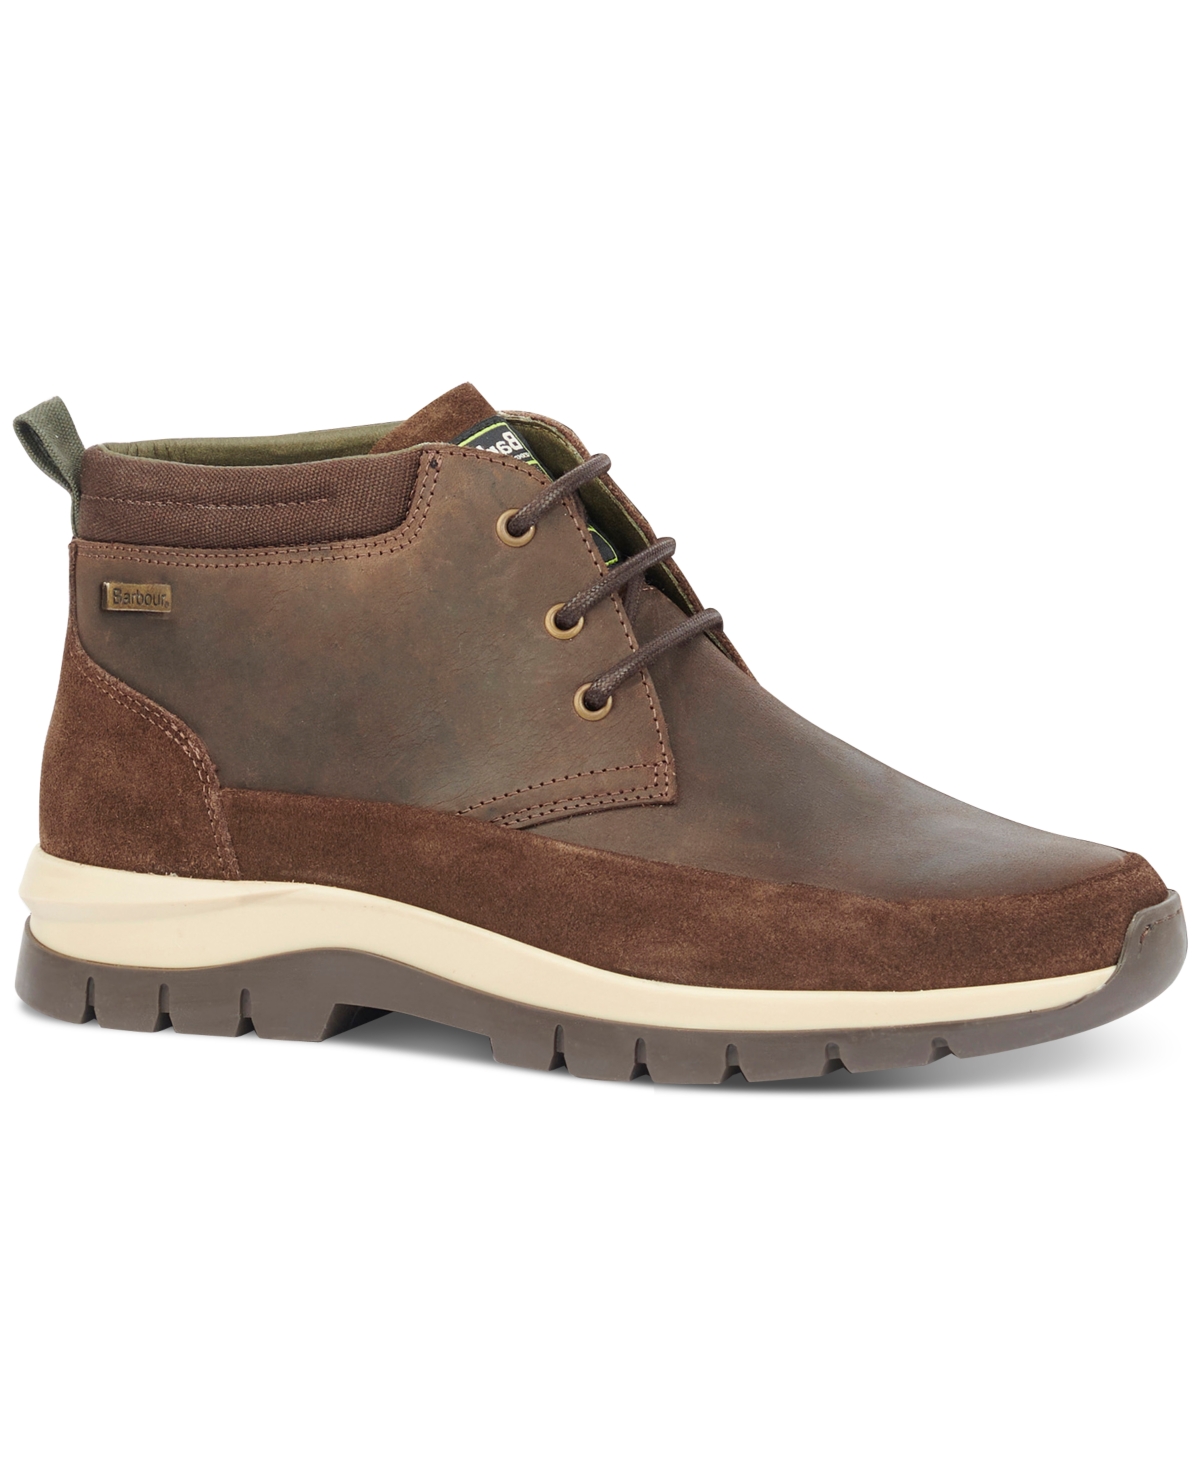 Men's Underwood Lace-up Boot - Choco